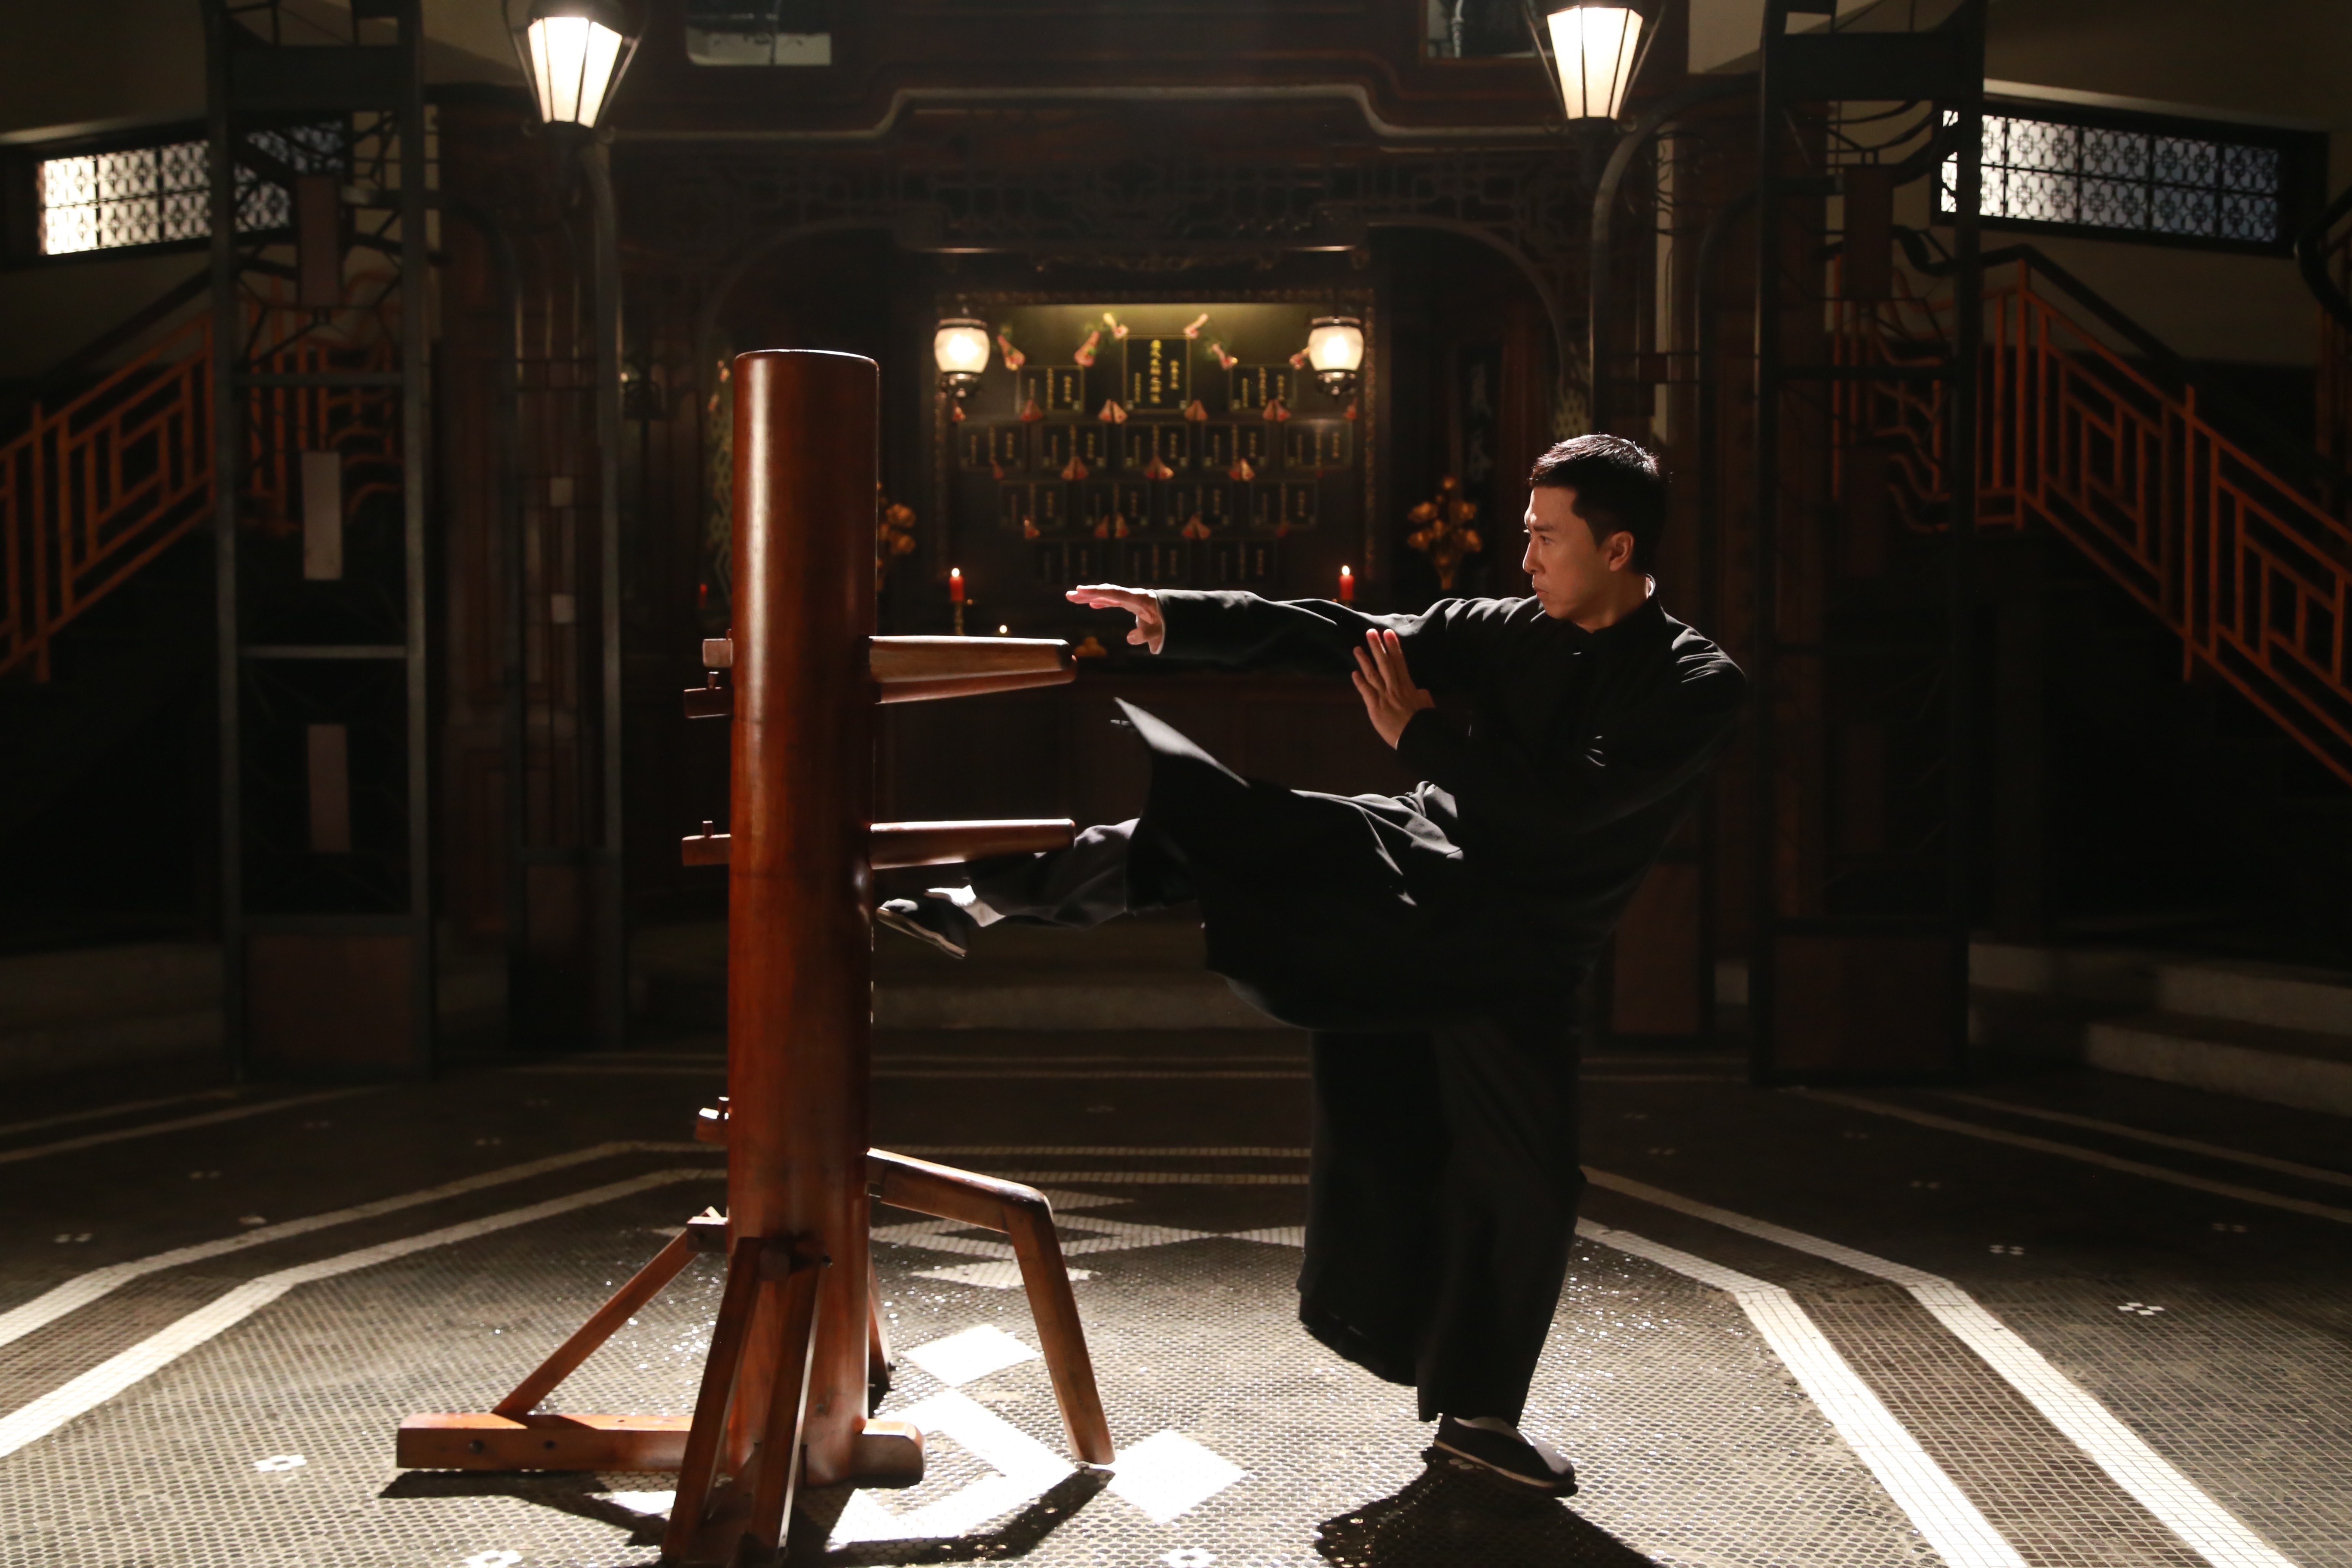 Donnie Yen as Ip Man, practicing on the Wing Chun Kung fu "wooden man&...